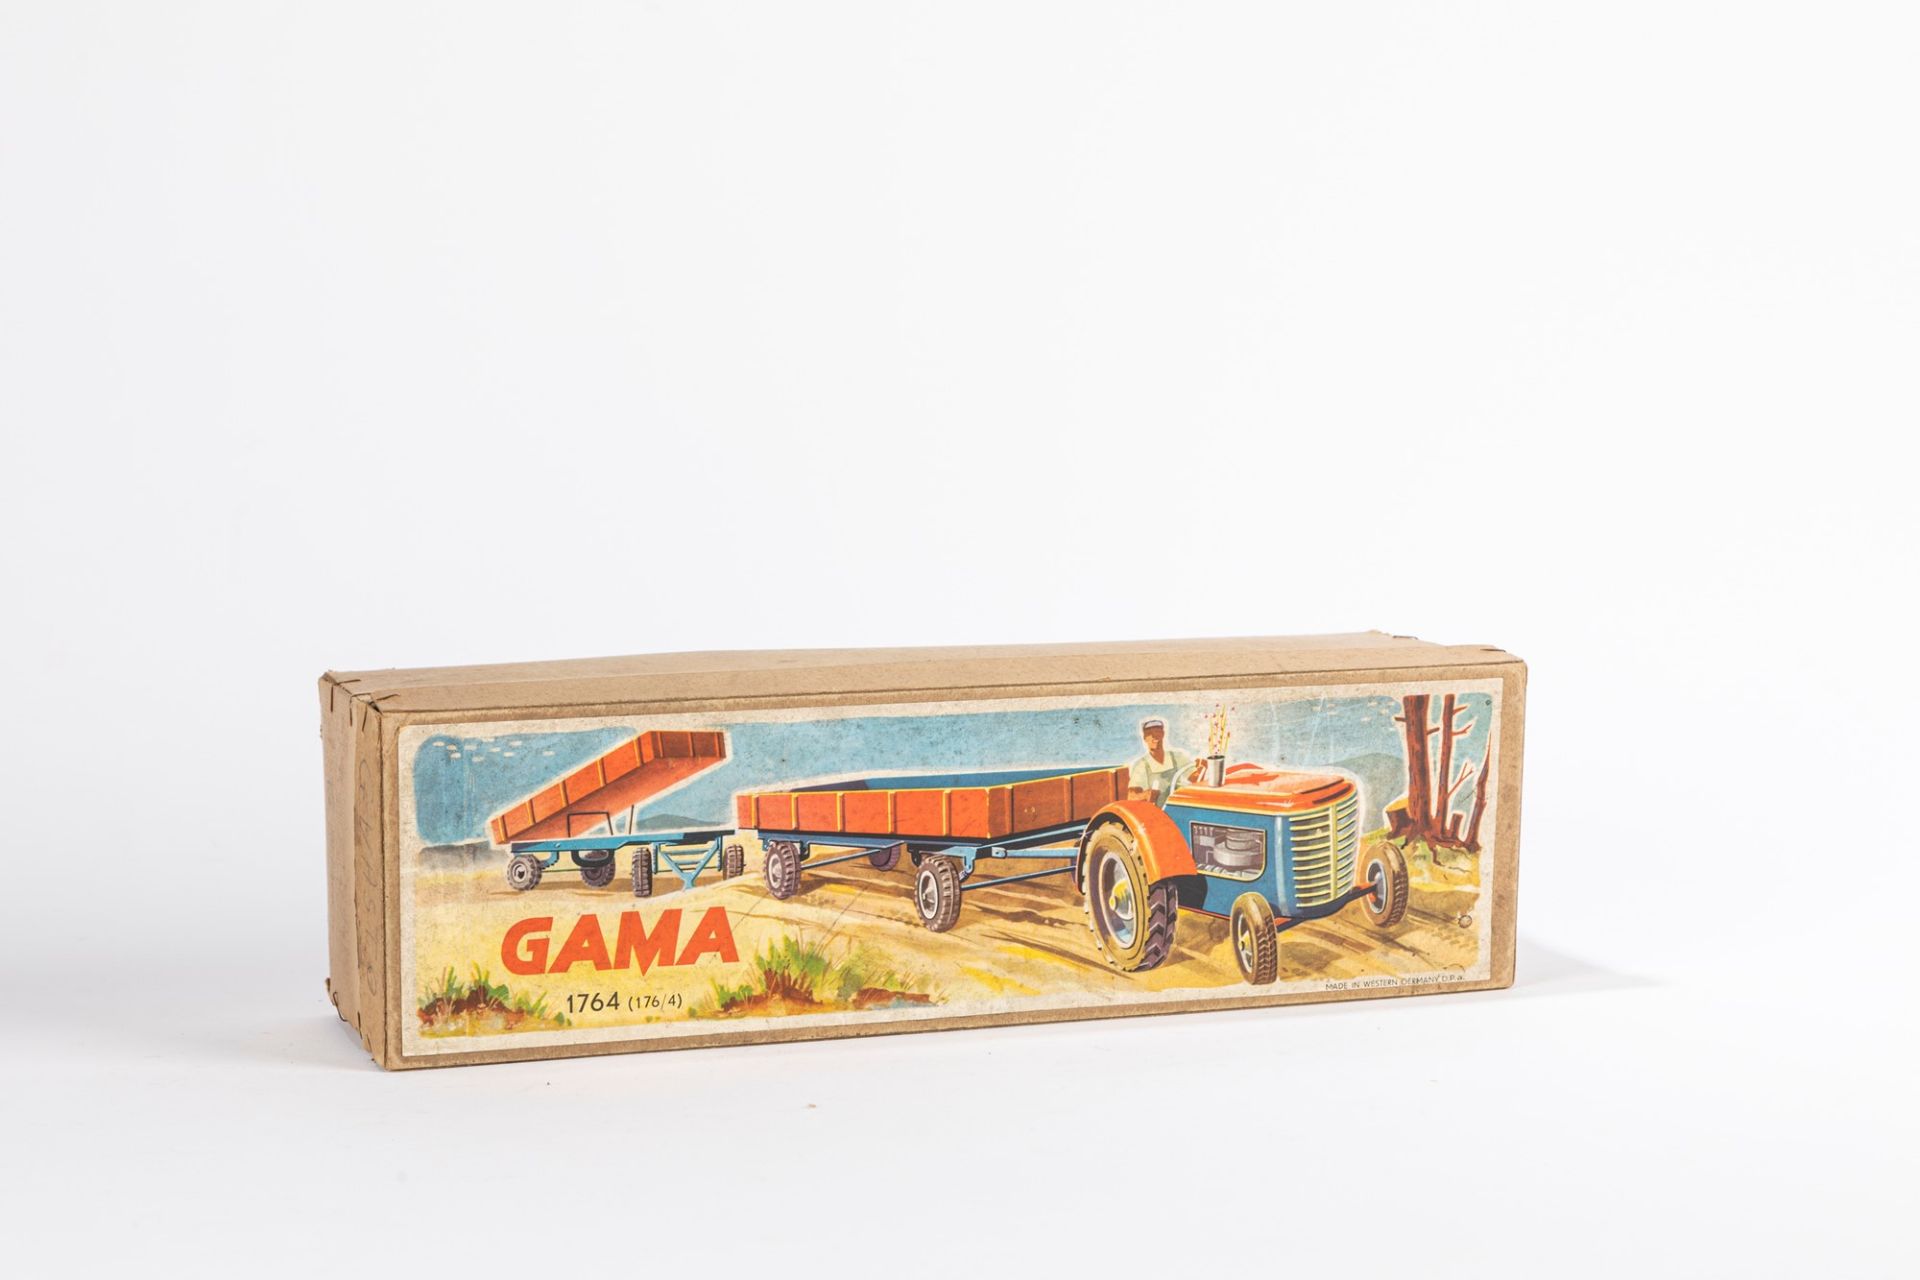 Gama - Tractor with tipper trailer, 40s - Image 3 of 3